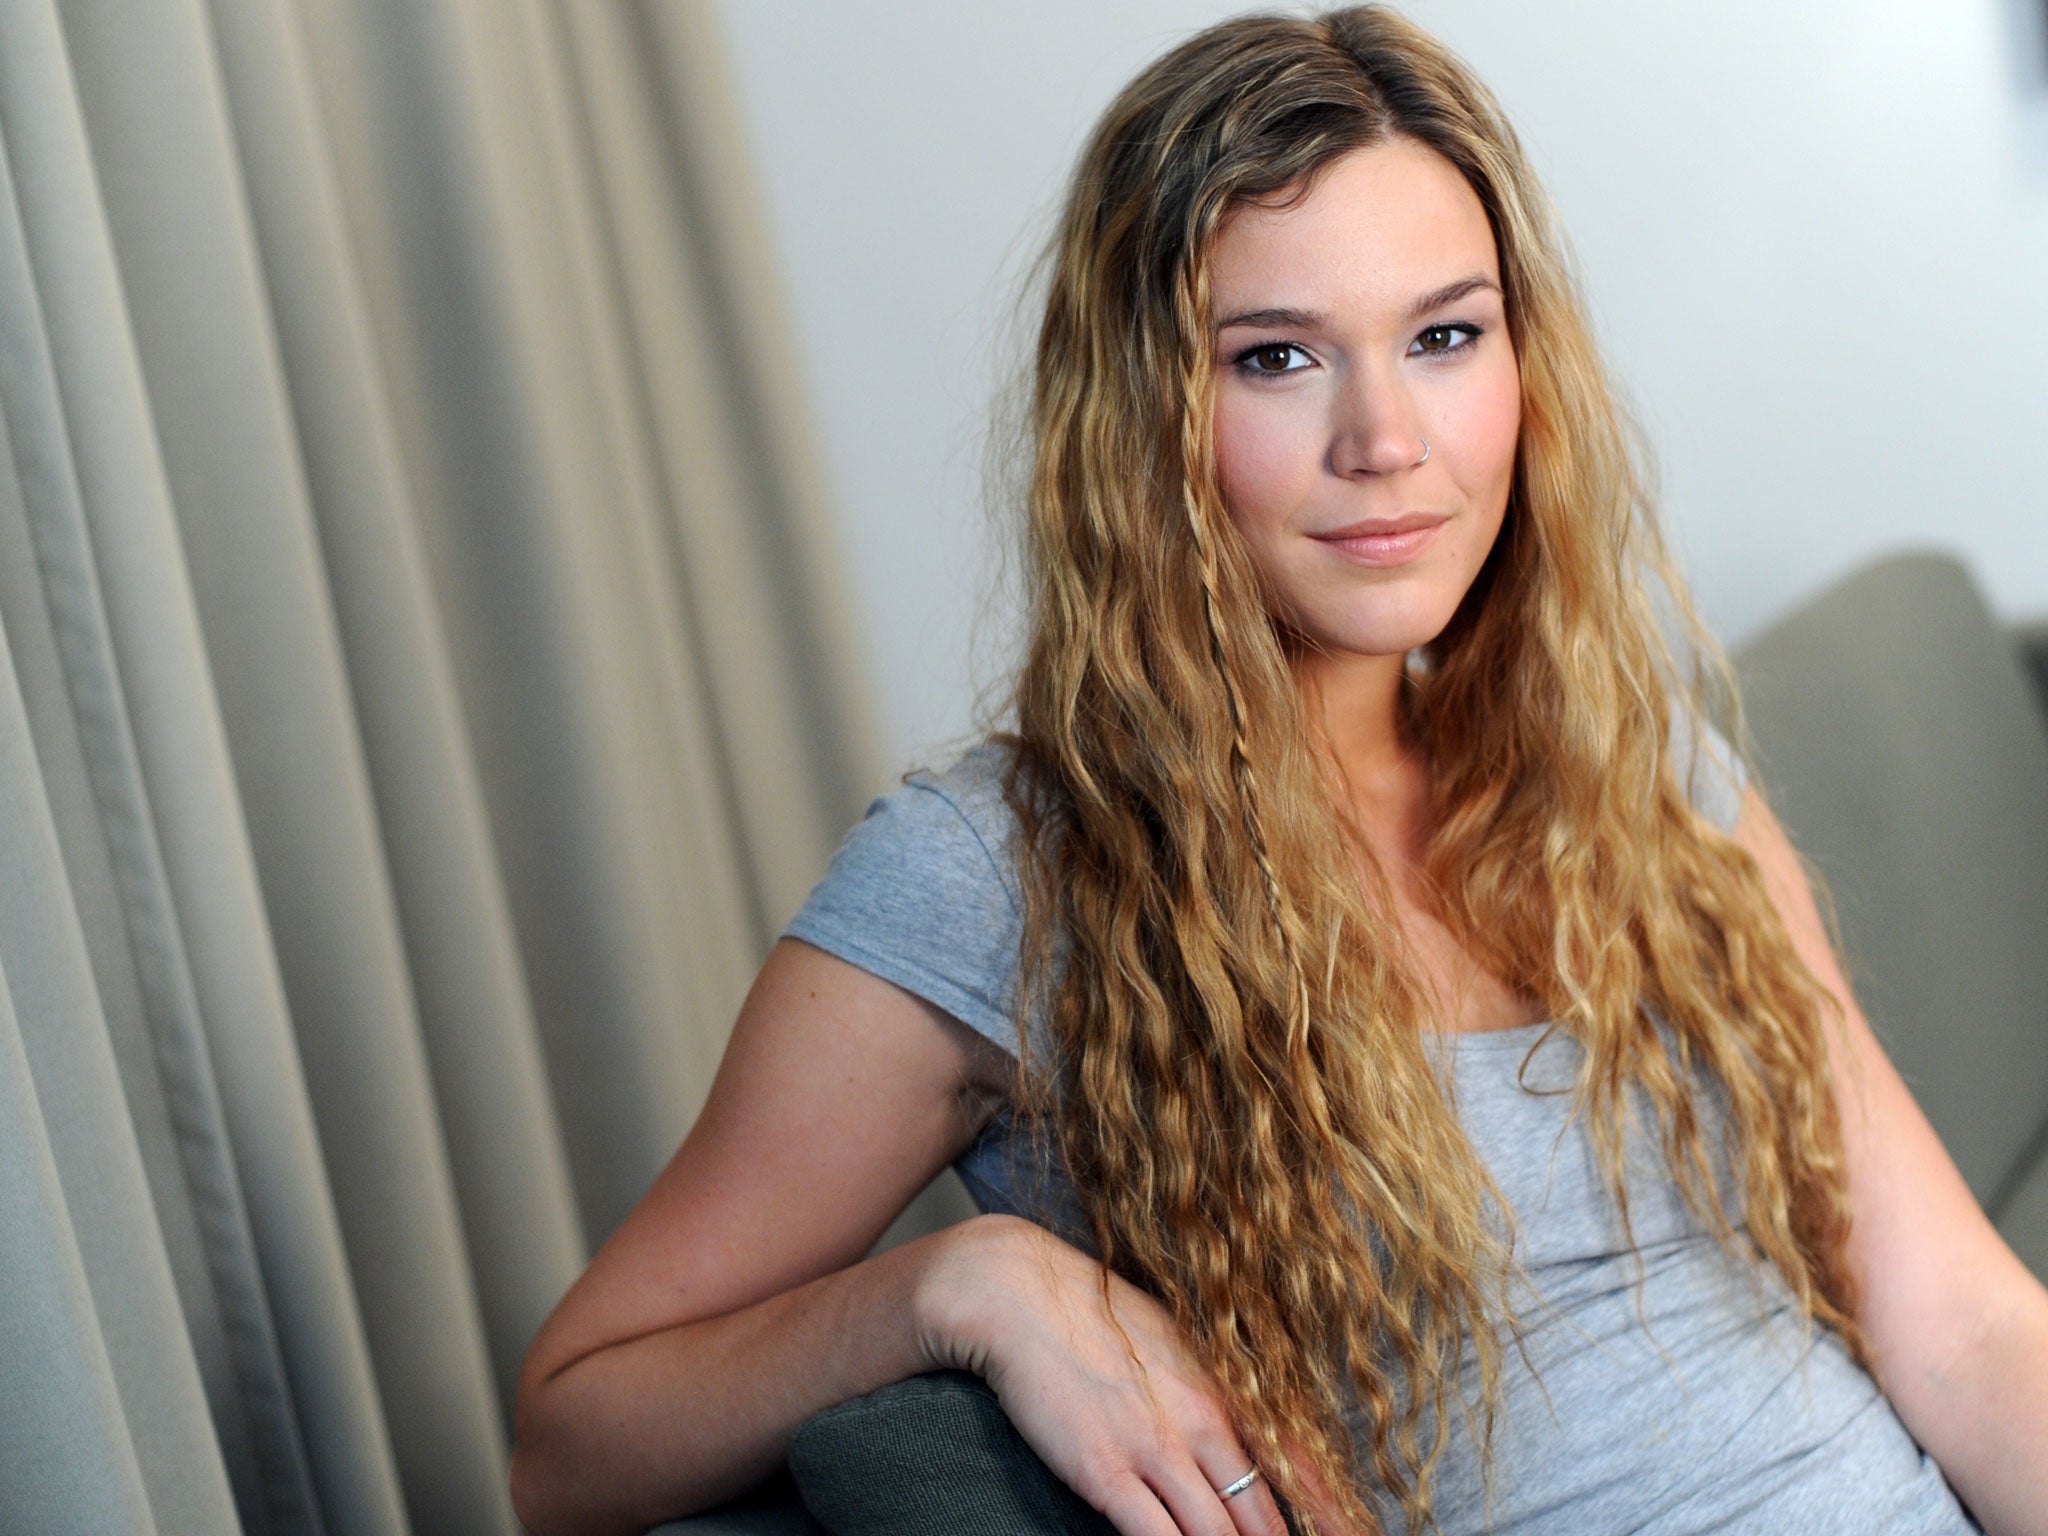 Soul singer Joss Stone has said she reacted to a shocking plot to kill her by thinking of it as a "random black comedy".